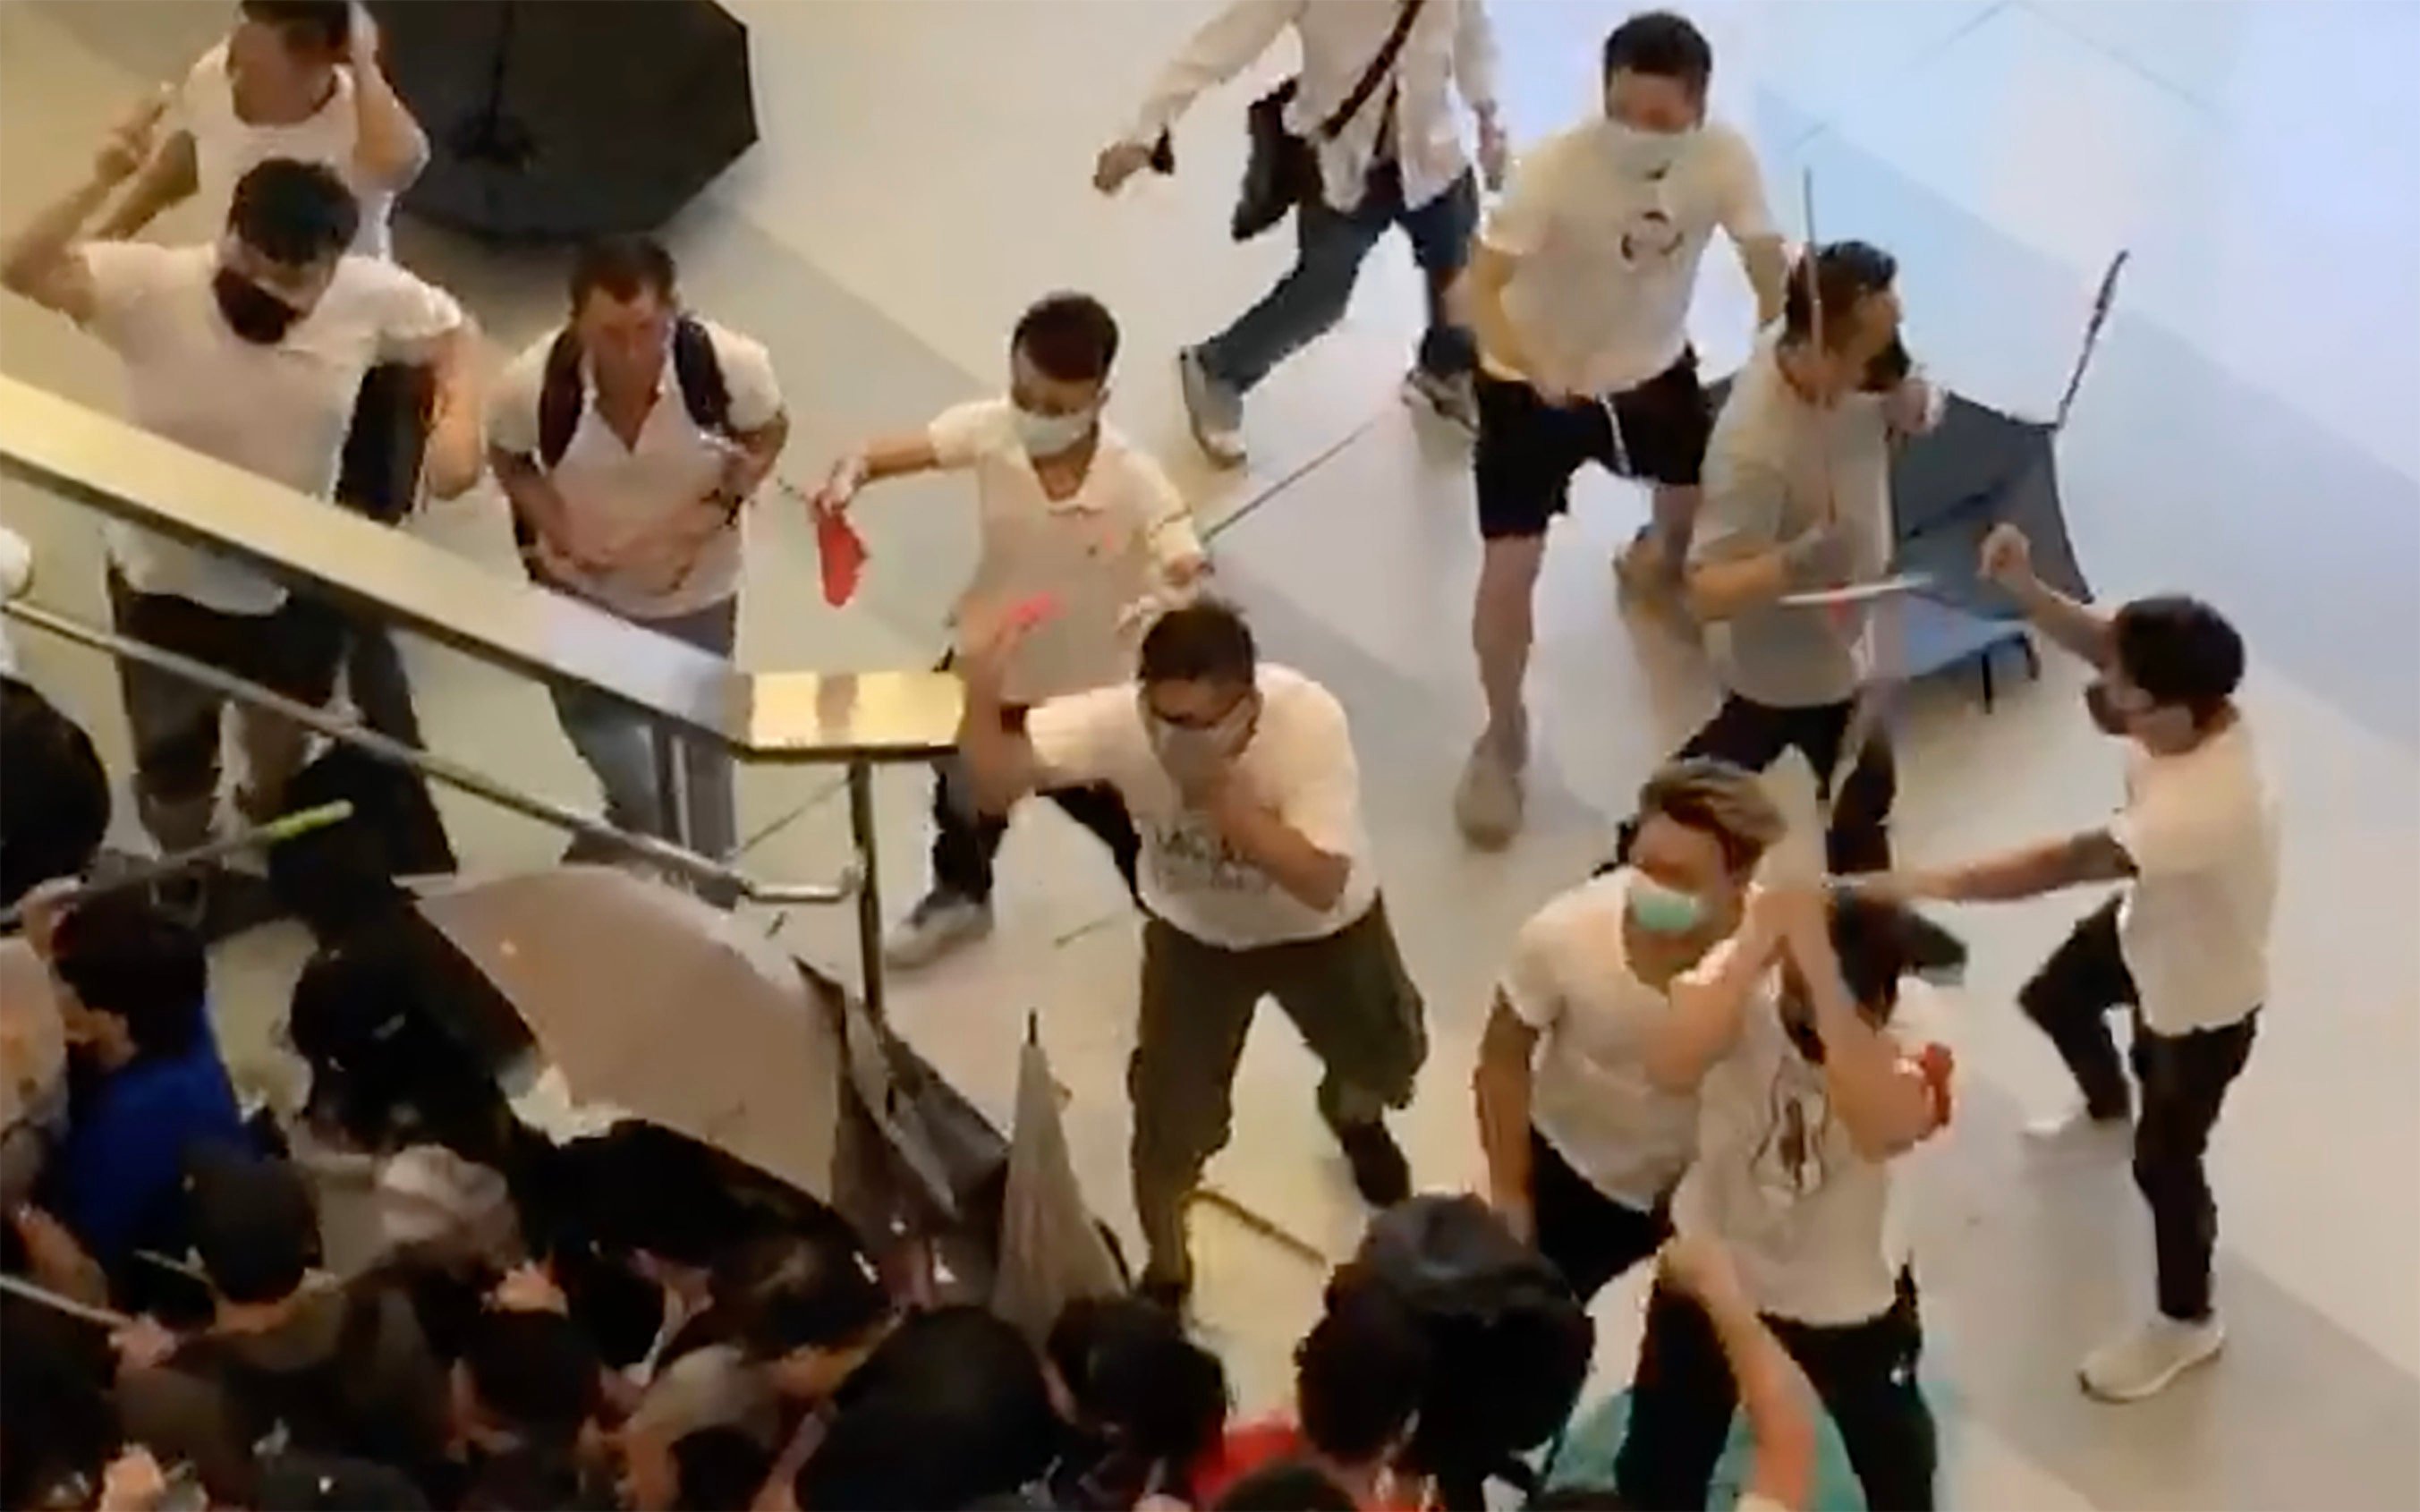 A screengrab from a video showing a number of people in white with wooden sticks chasing and assaulting people at Yuen Long Station in 2019. Photo: Handout